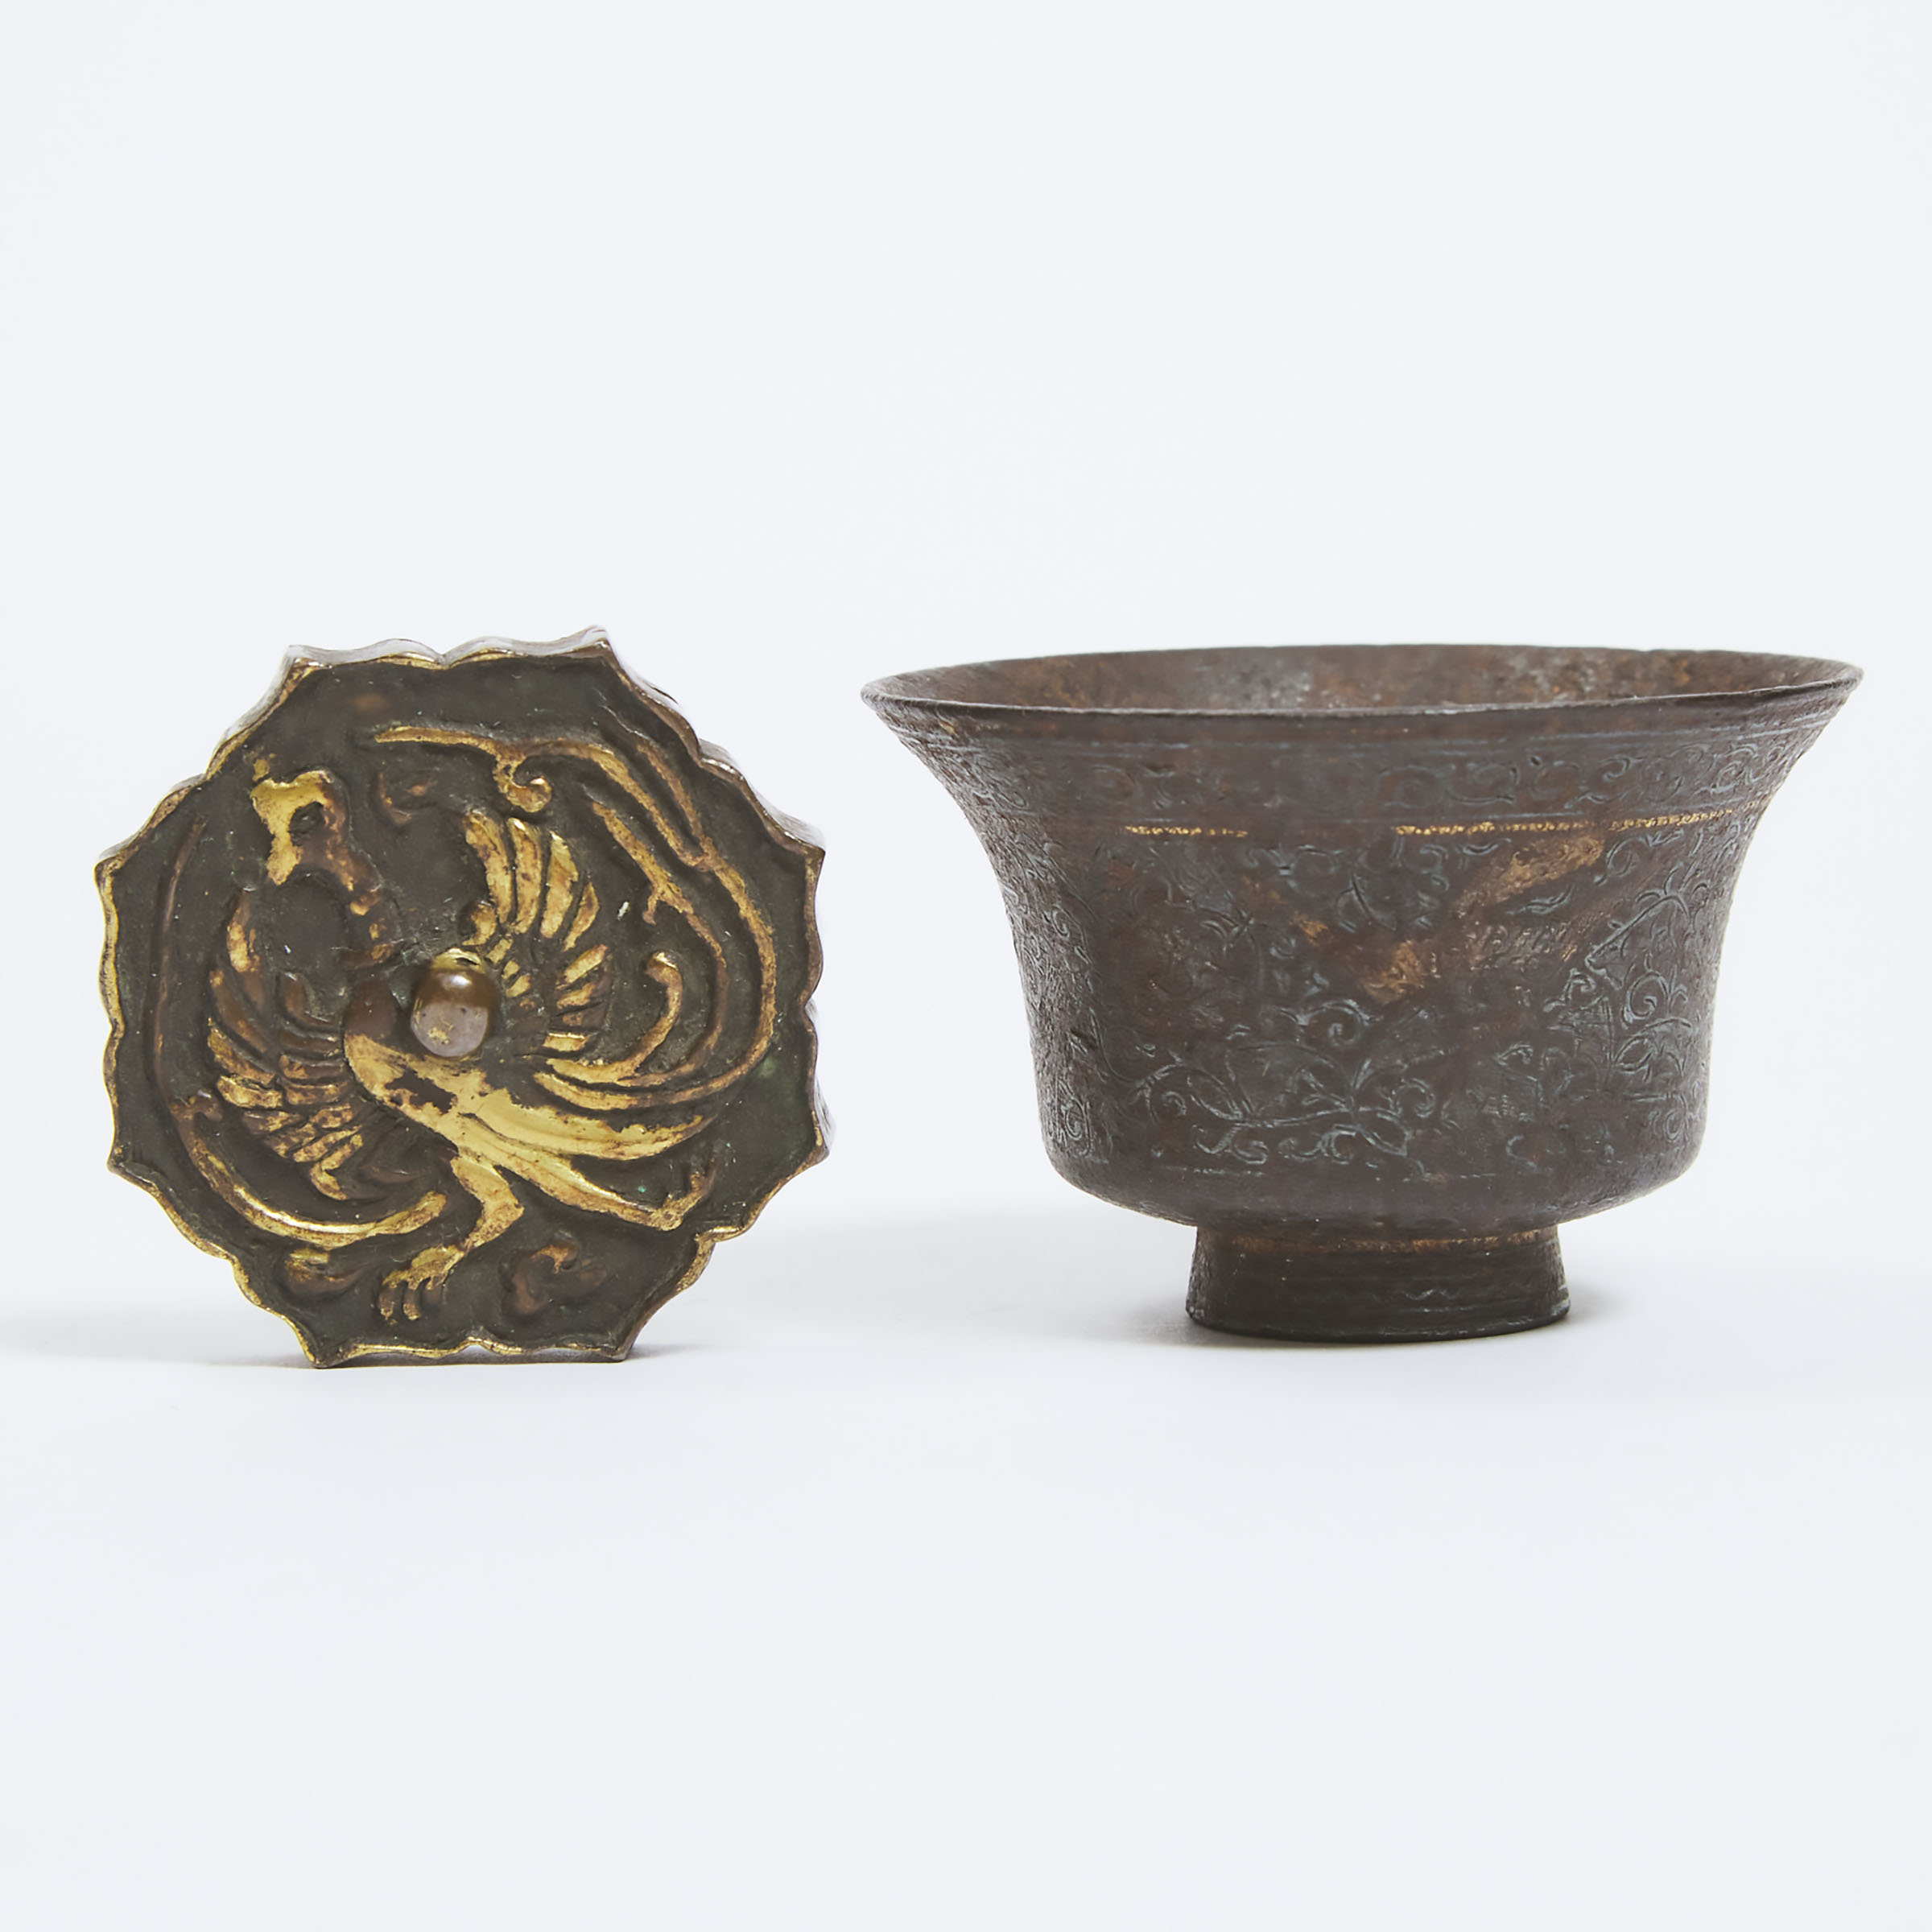 A Cast Silver Cup with Gilt Highlights, Together With a Gilt Bronze Paper Weight, Liao Dynasty or Later